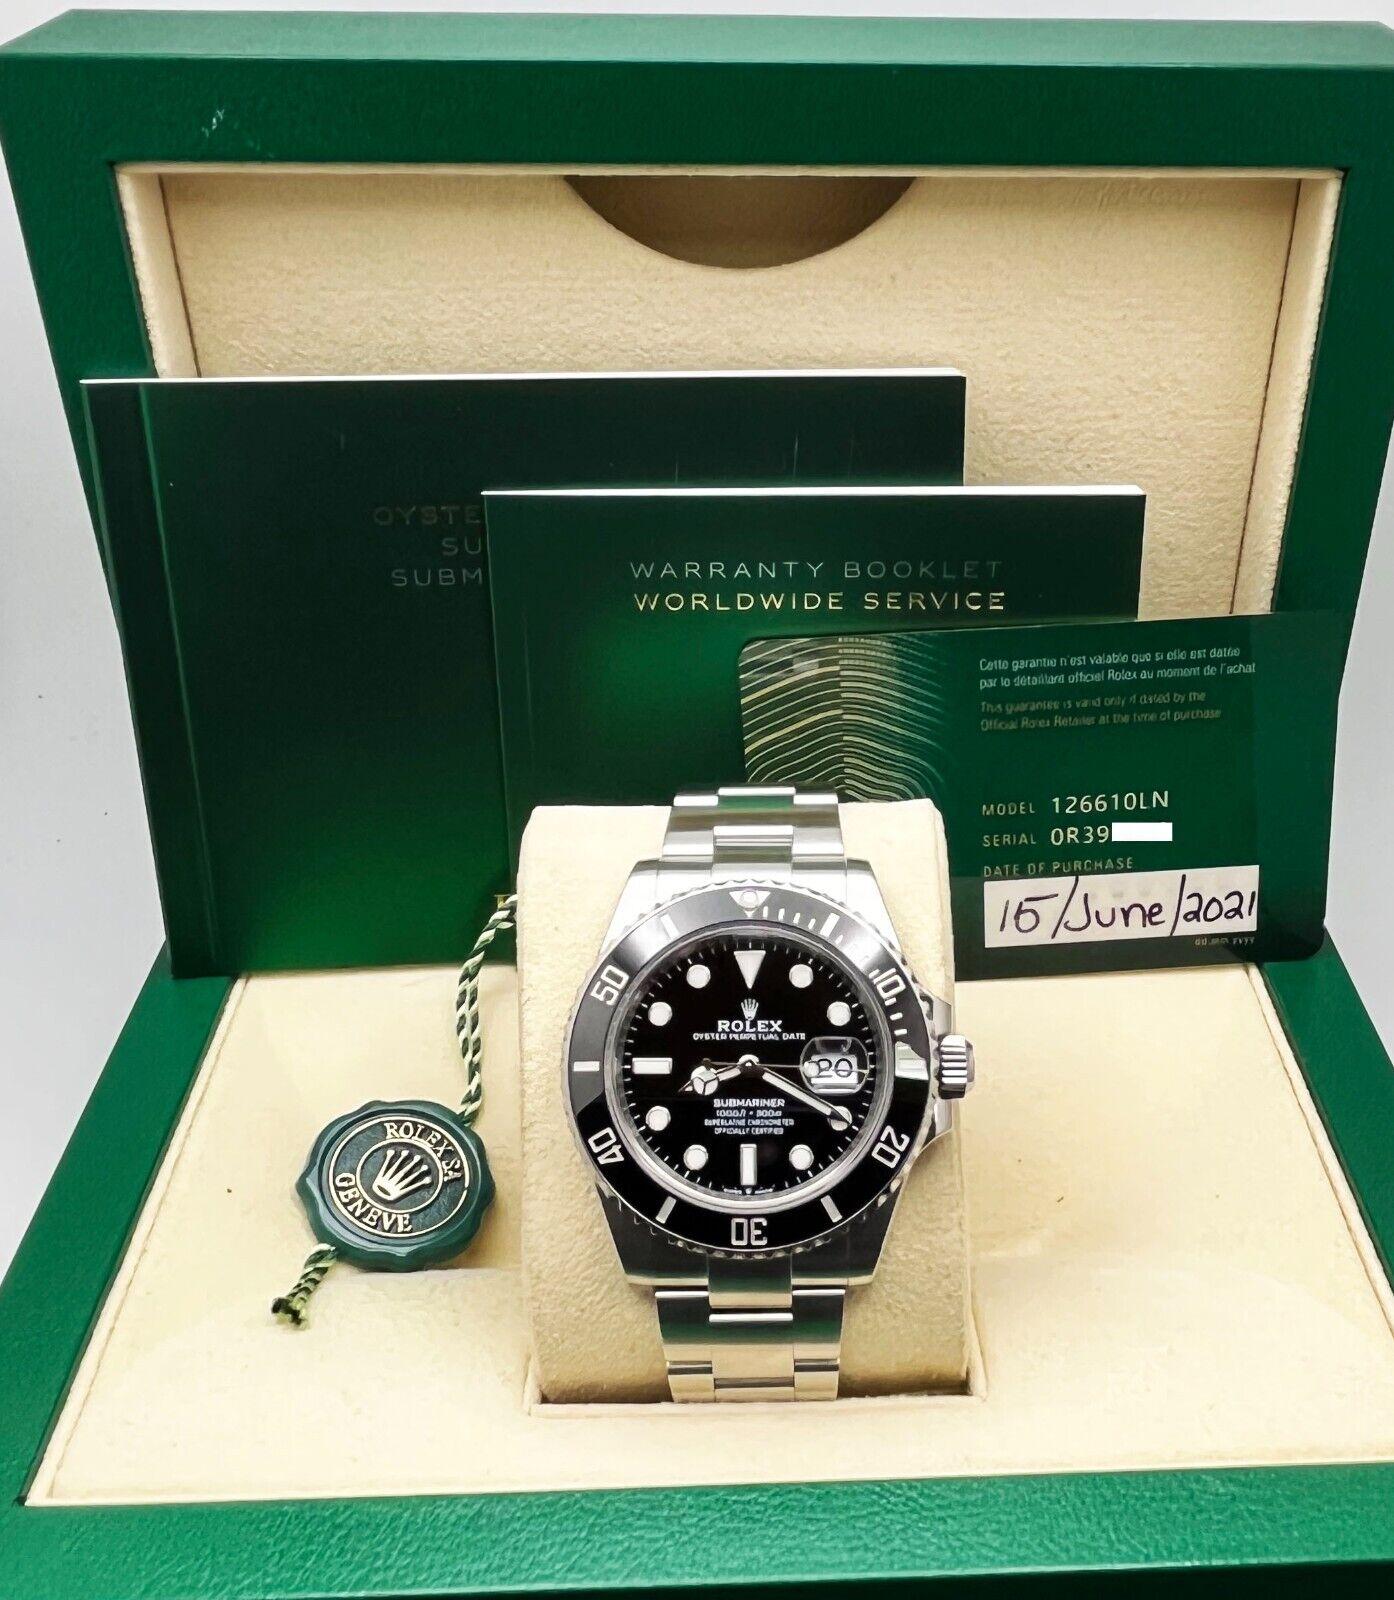 Style Number: 126610

Serial: 0R39X***

Year: 2021
 
Model: Submariner
 
Case Material: Ceramic
 
Band: Stainless Steel
 
Bezel: Stainless Steel
 
Dial: Black
 
Face: Sapphire Crystal
 
Case Size: 41mm
 
Includes: 
-Rolex Box & Papers
-Certified